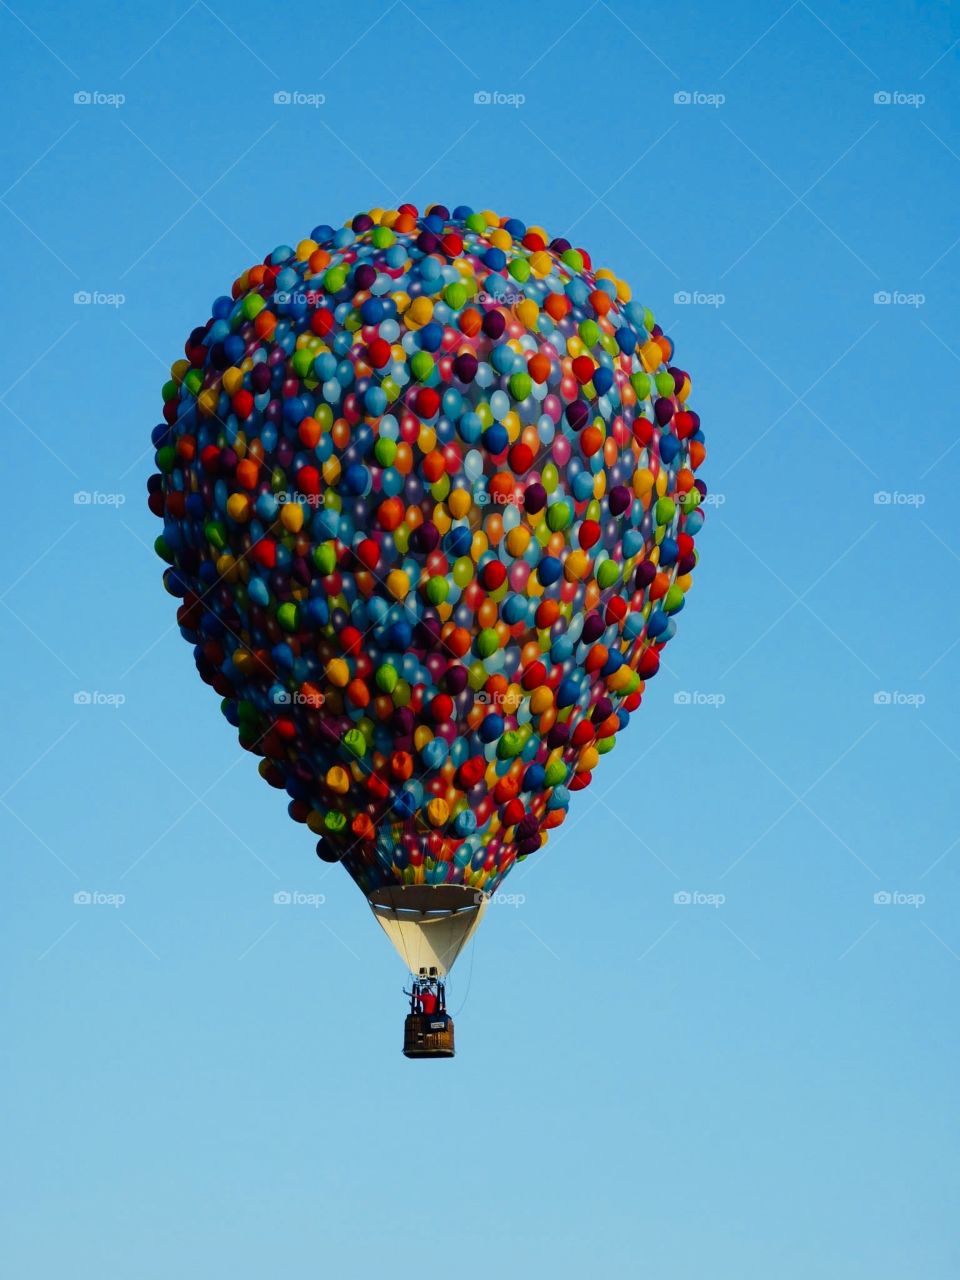 Up up balloon 